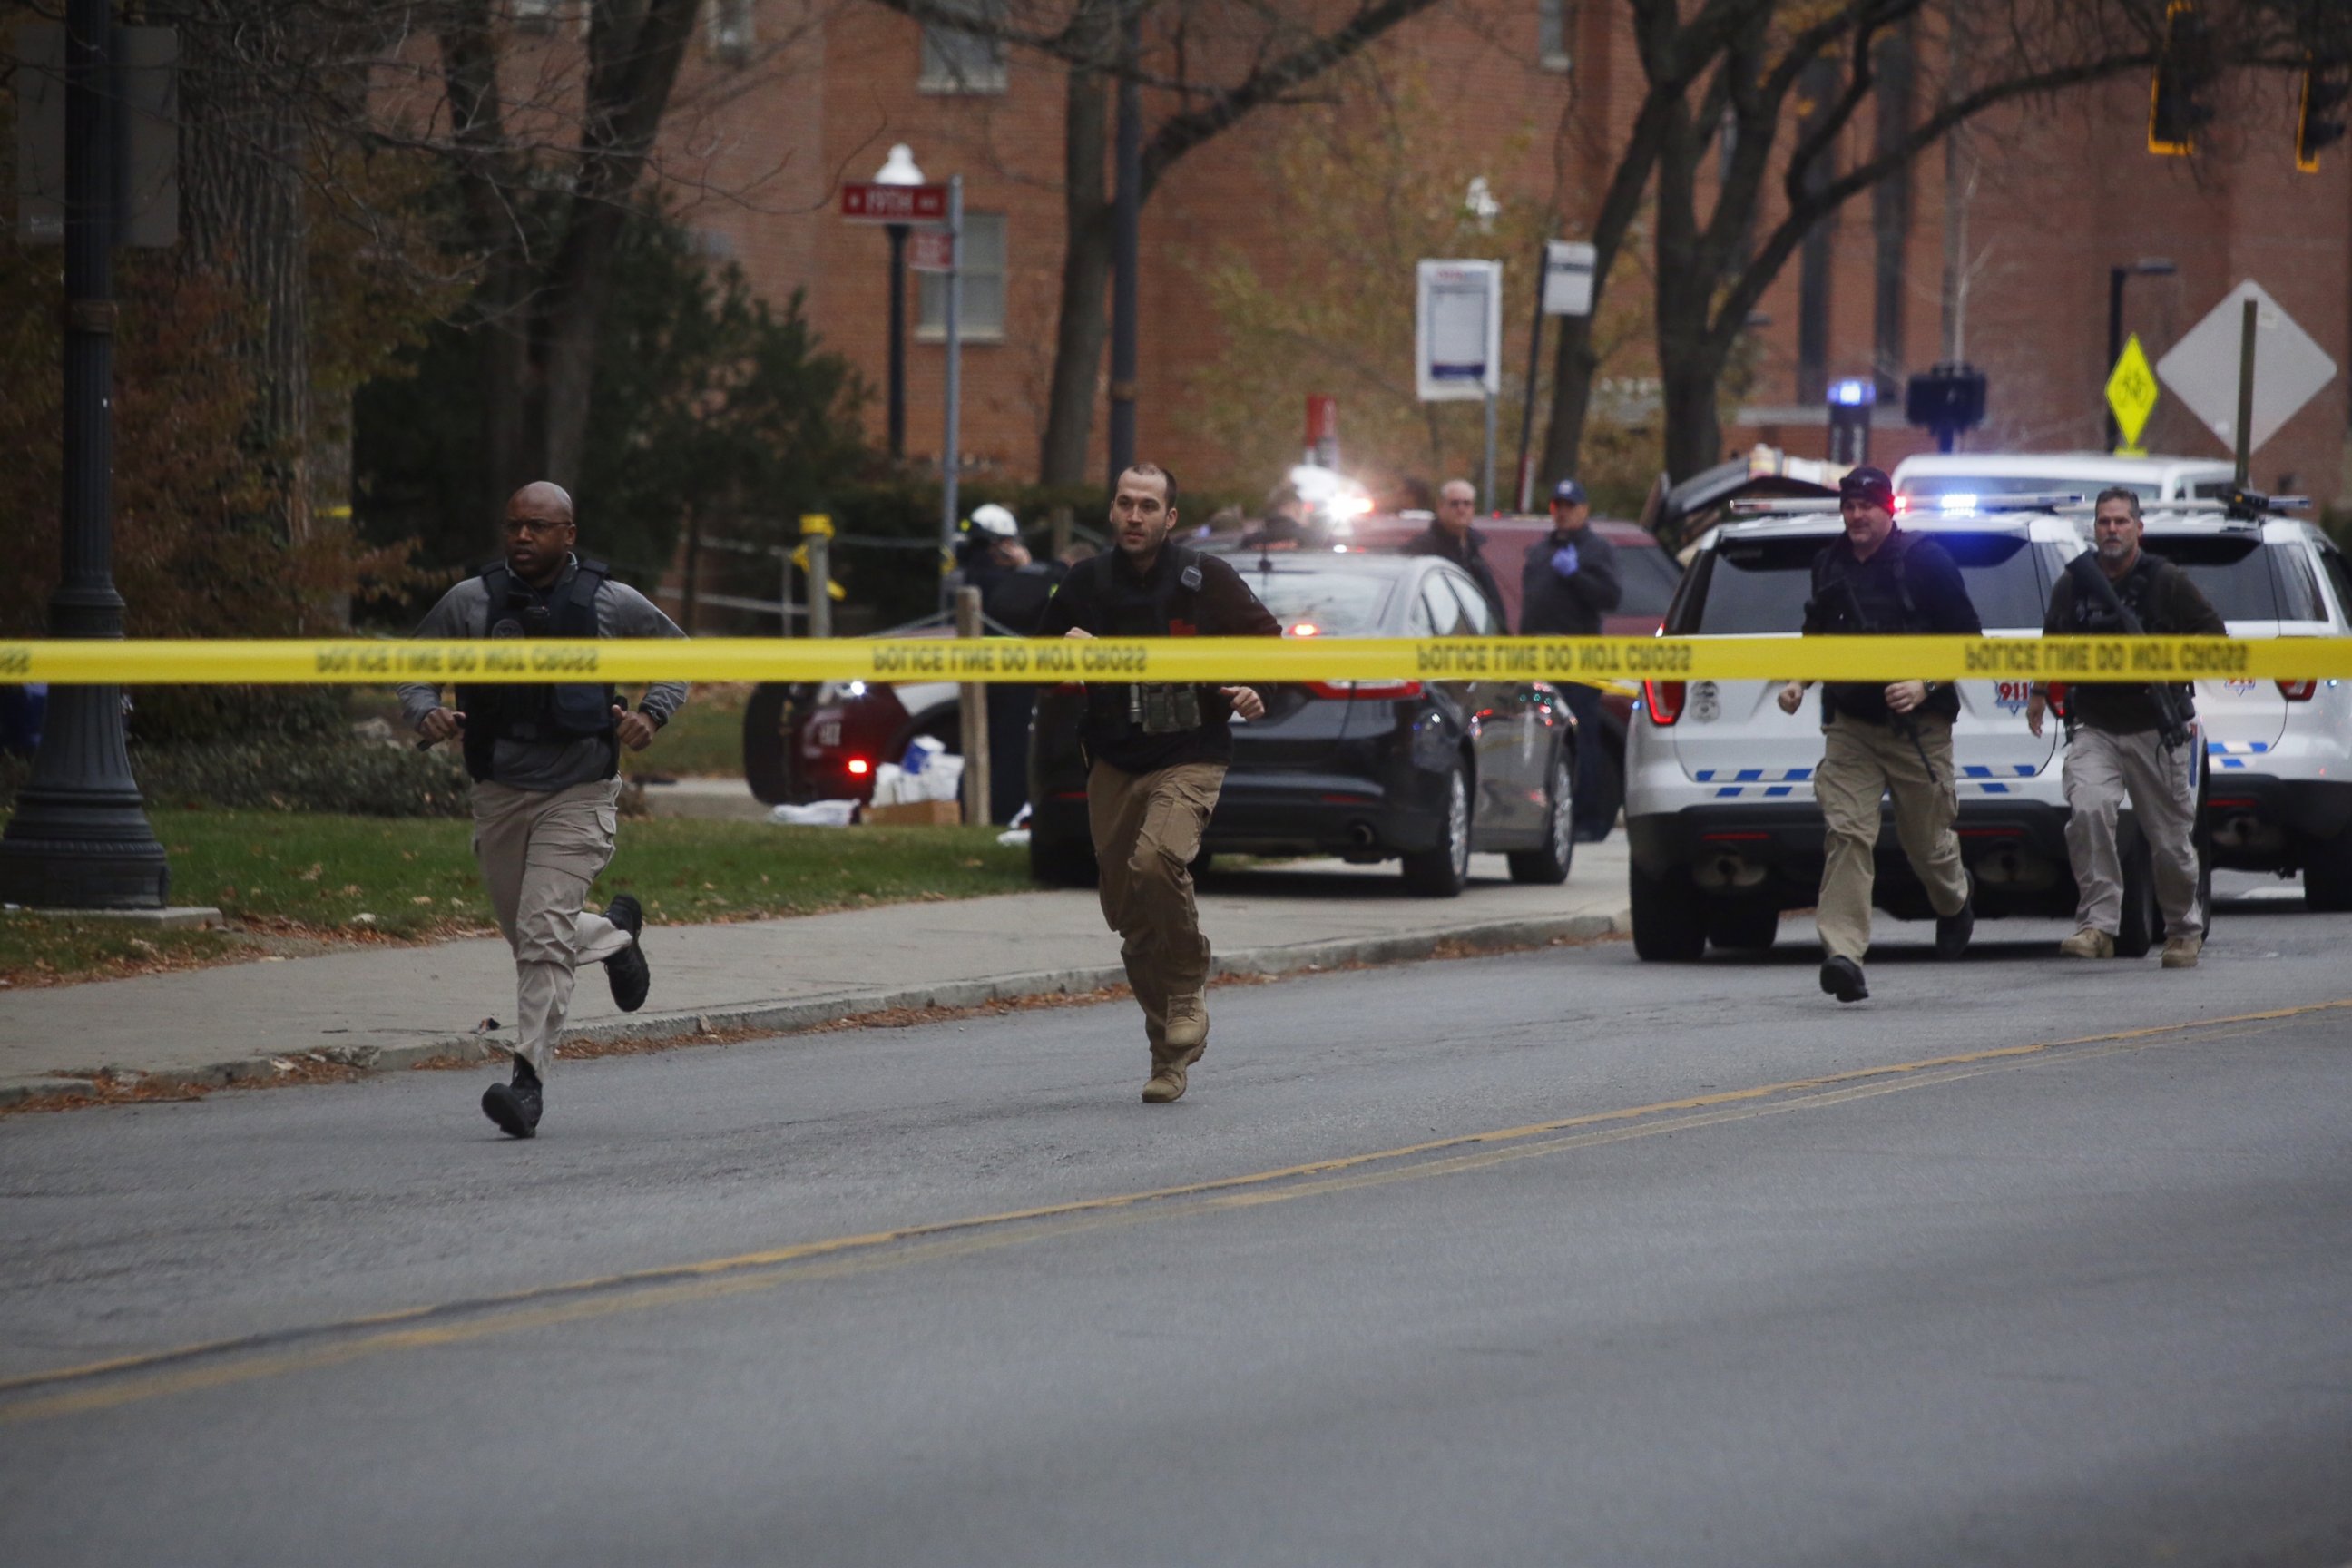 PHOTO: Police respond to reports of an active shooter on campus at Ohio State University on Monday, Nov. 28, 2016, in Columbus, Ohio.